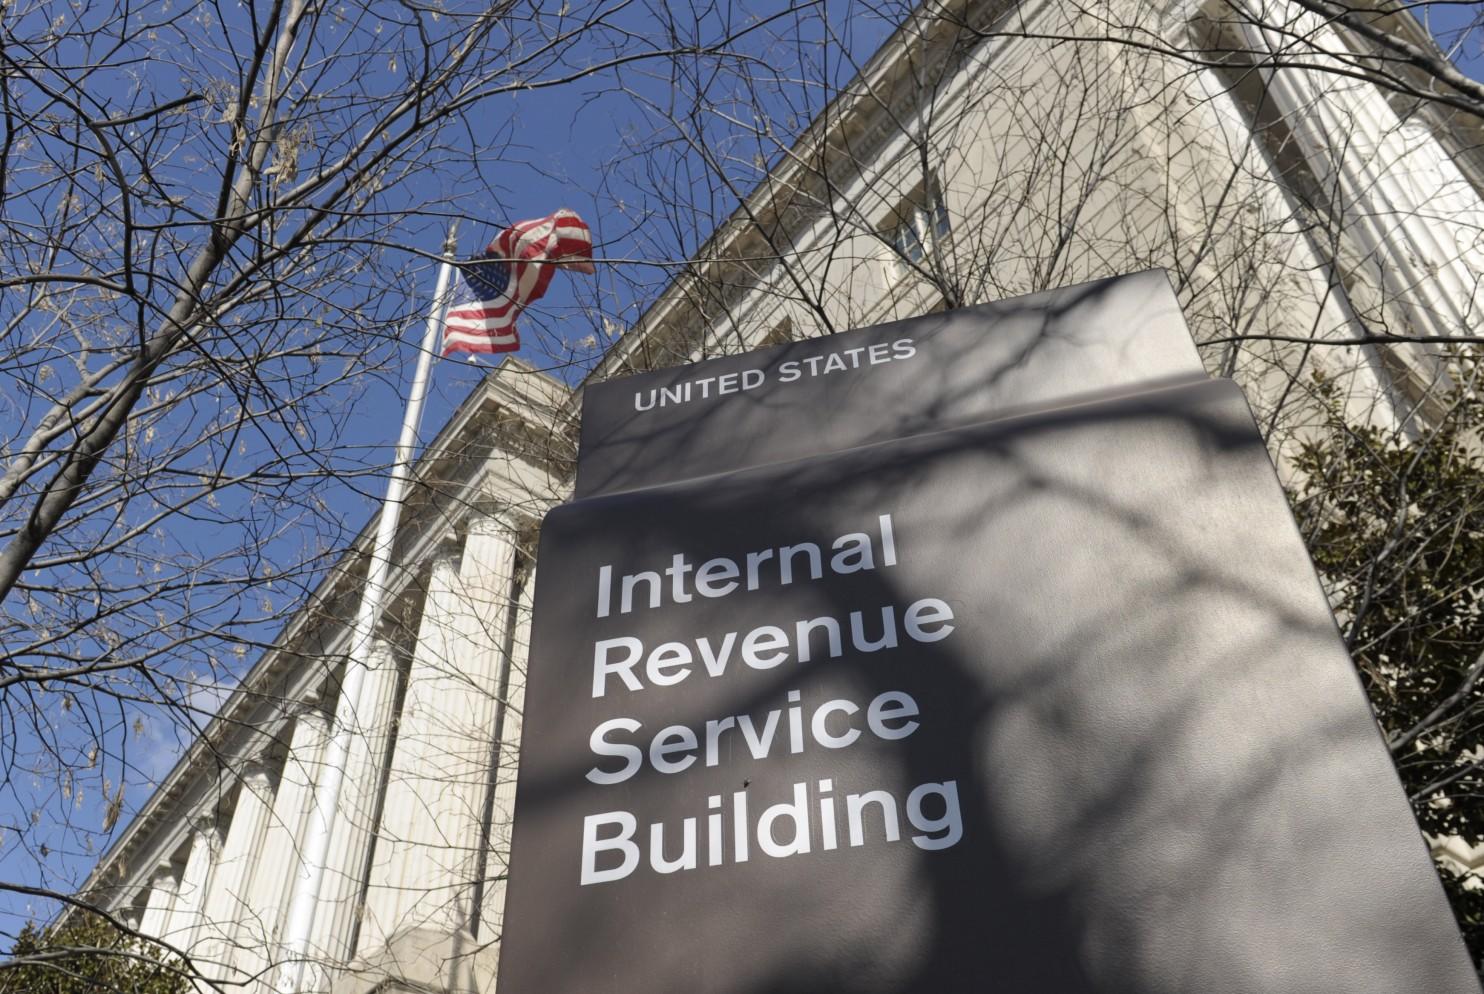 Freelancer's guide to taxes IRS building exterior with signage